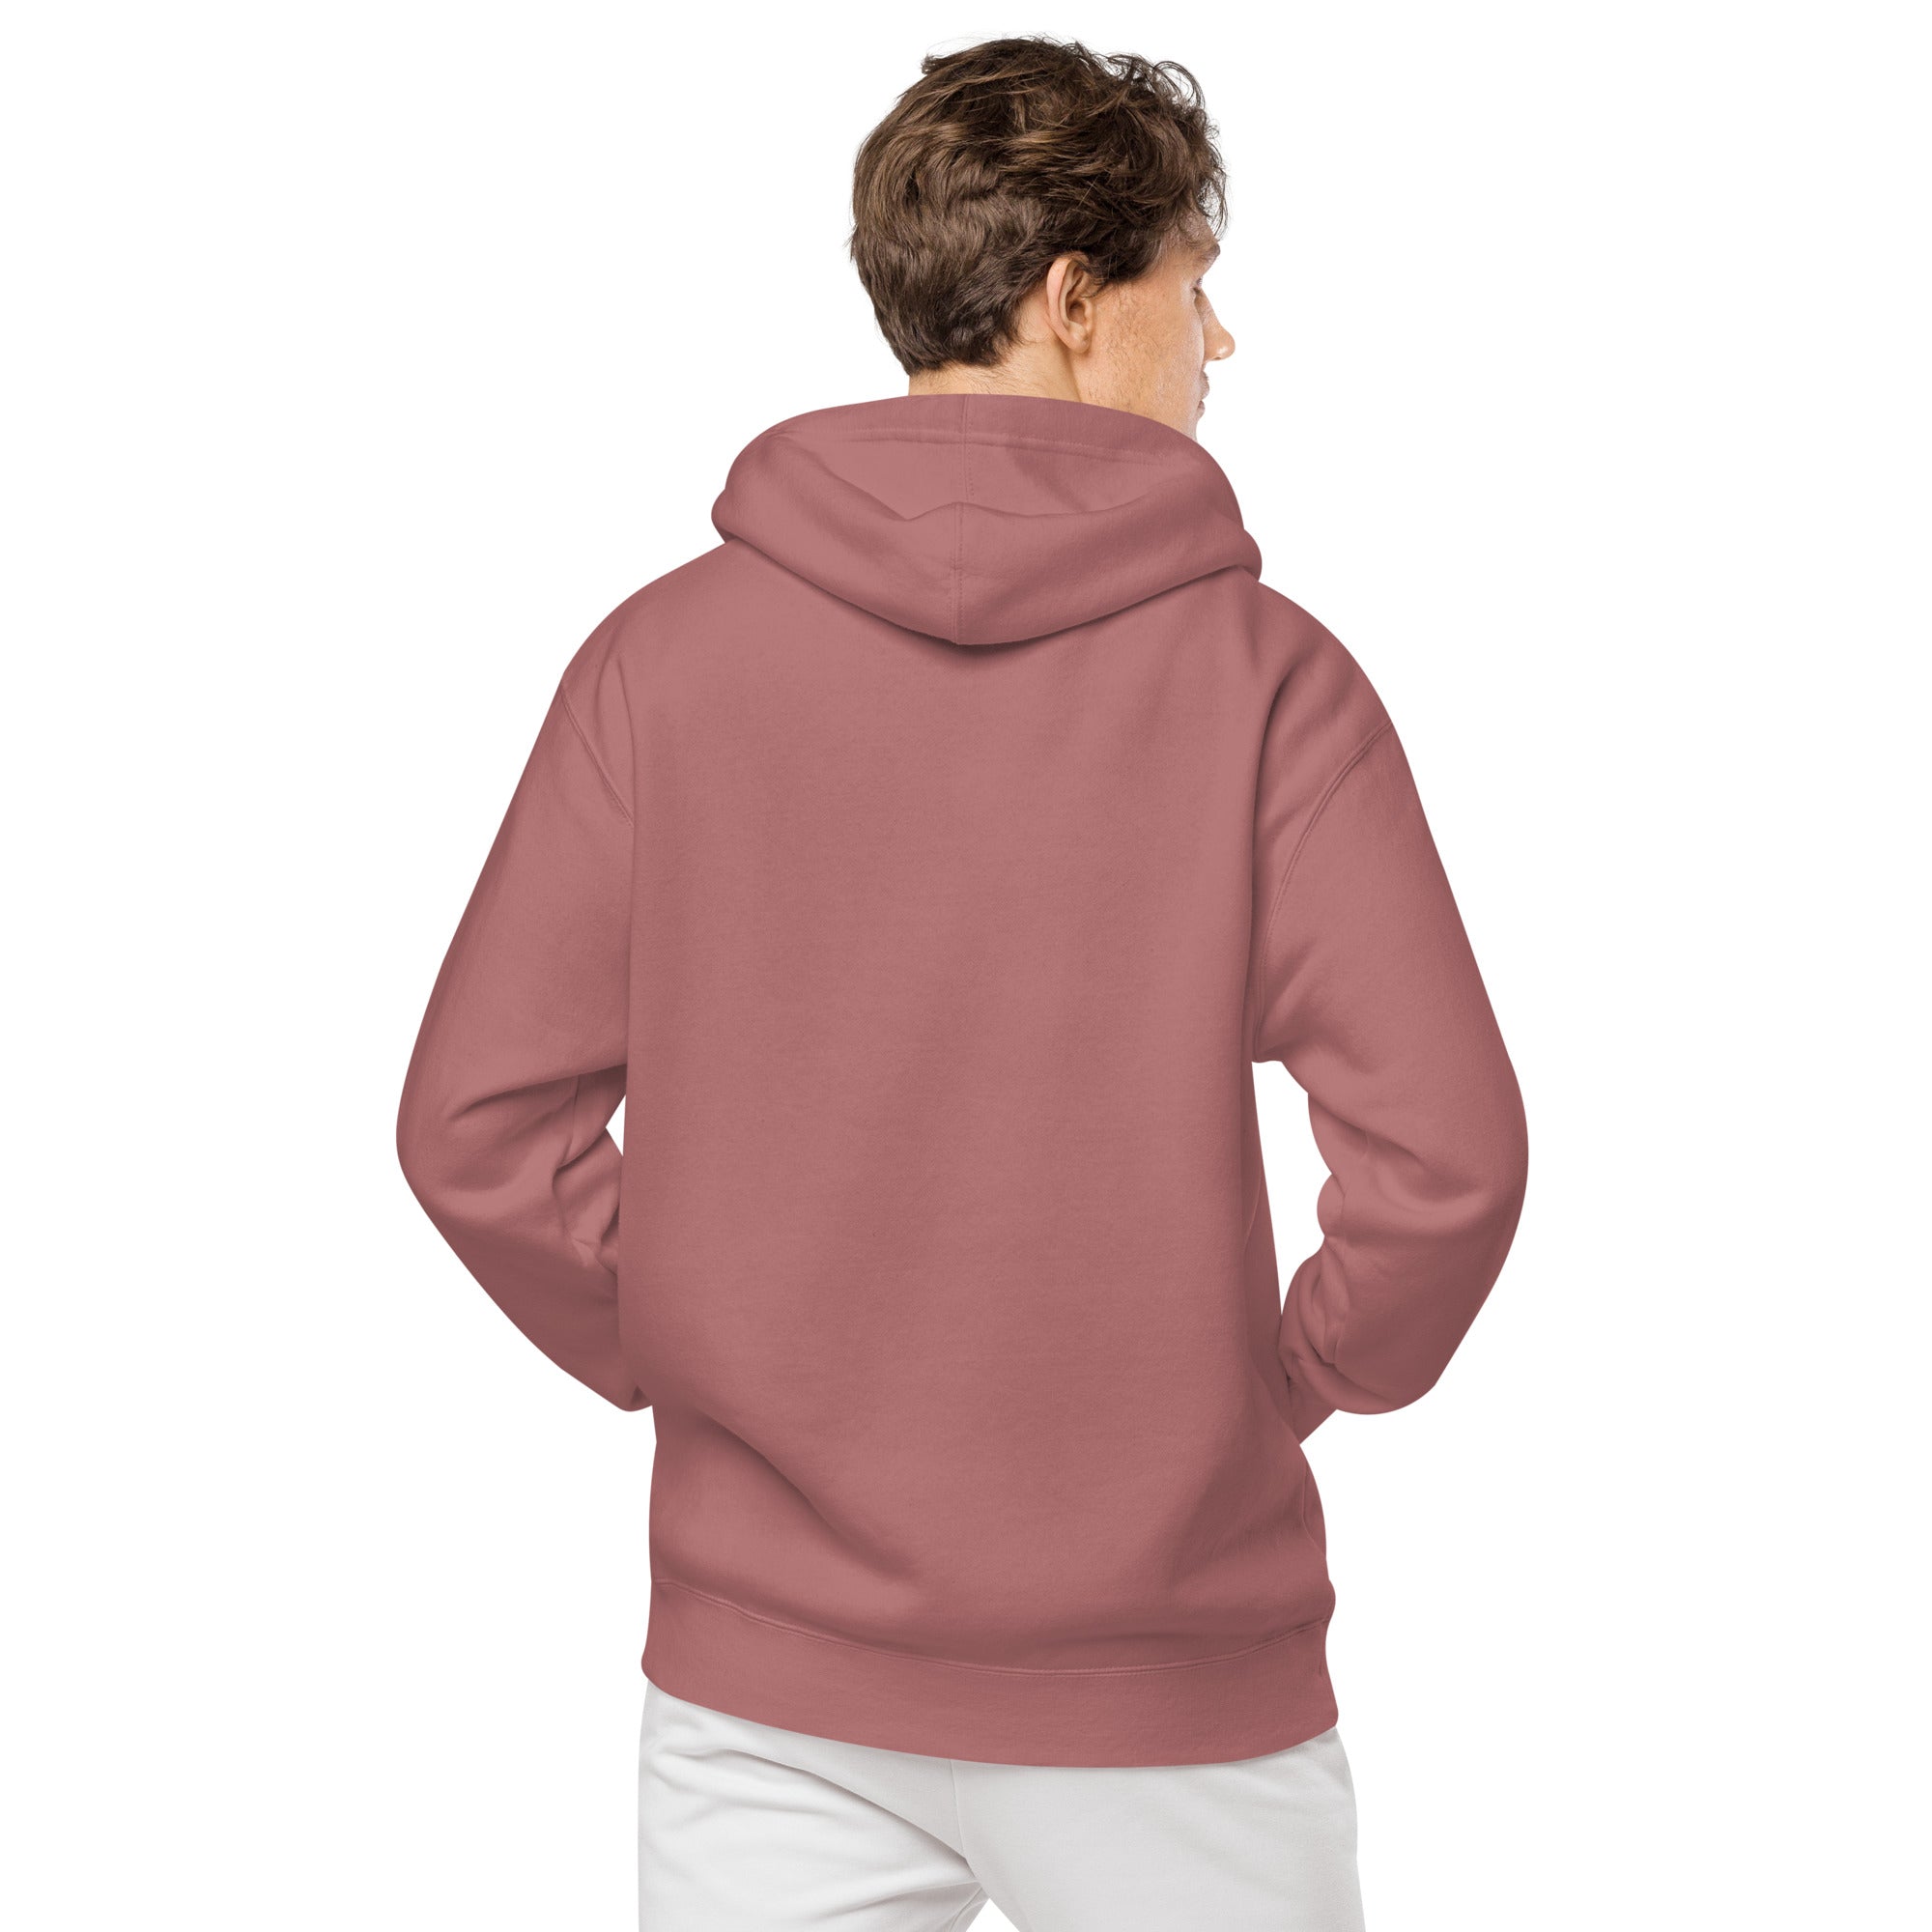 Men’s Bomb Shelter Pigment-Dyed Hoodie